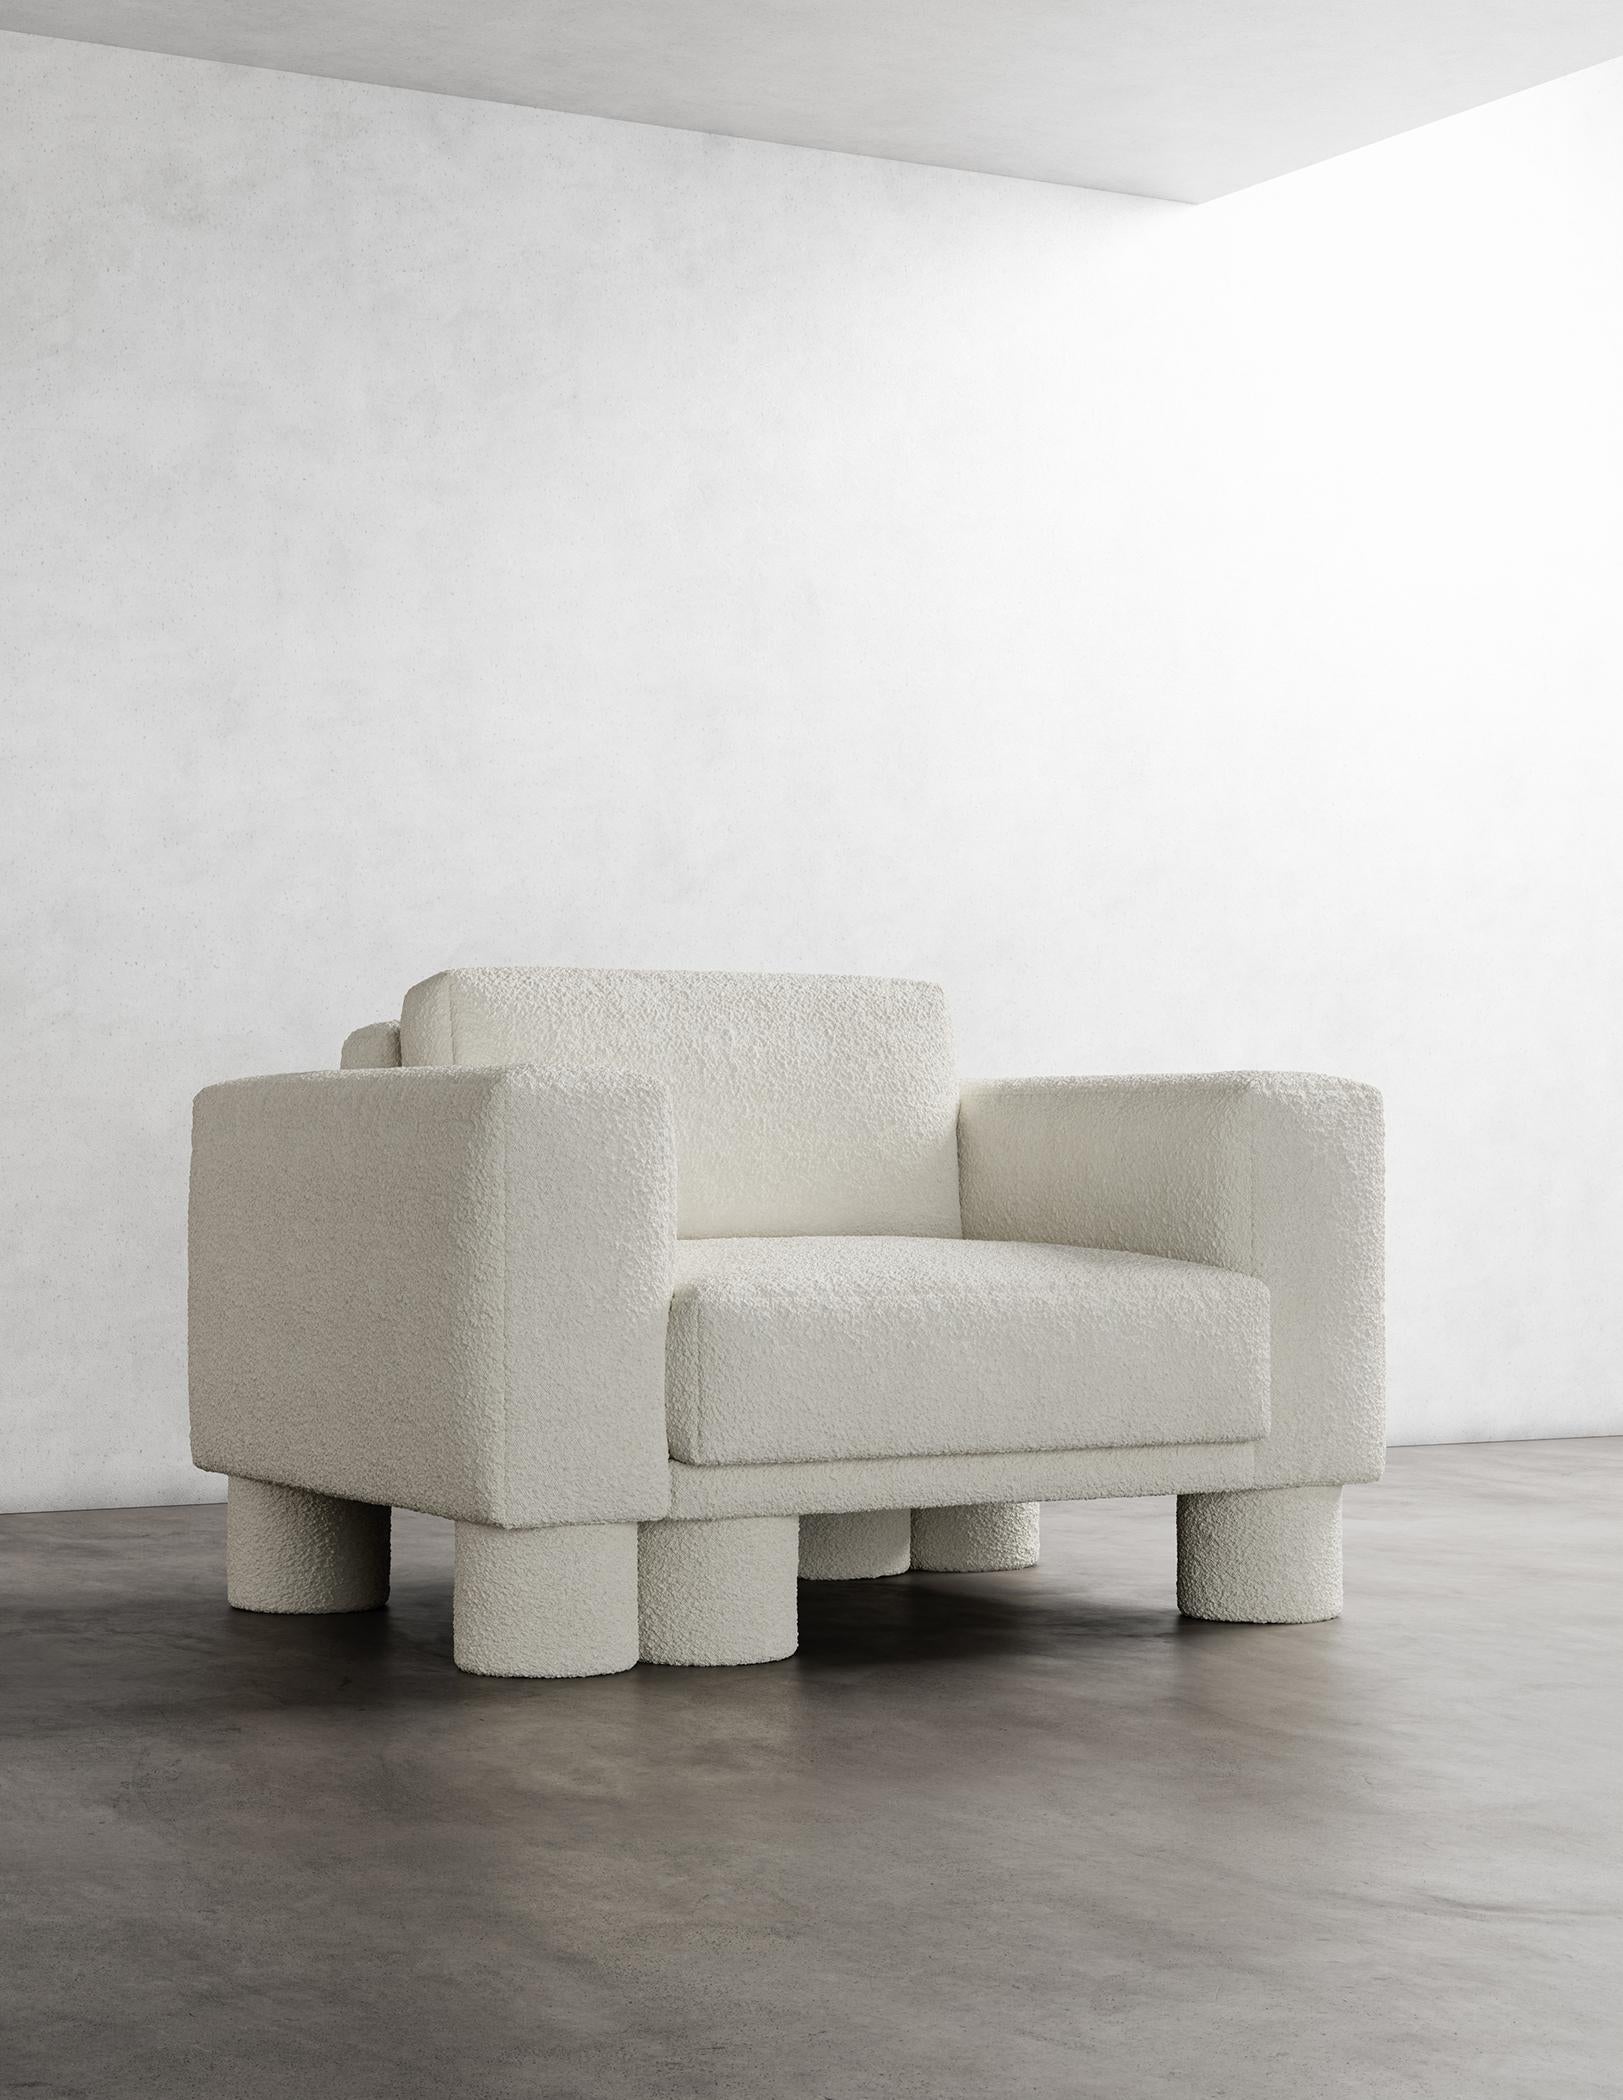 PILLAR CHAIR - Modern Chair in Soft White Boucle In New Condition For Sale In Laguna Niguel, CA